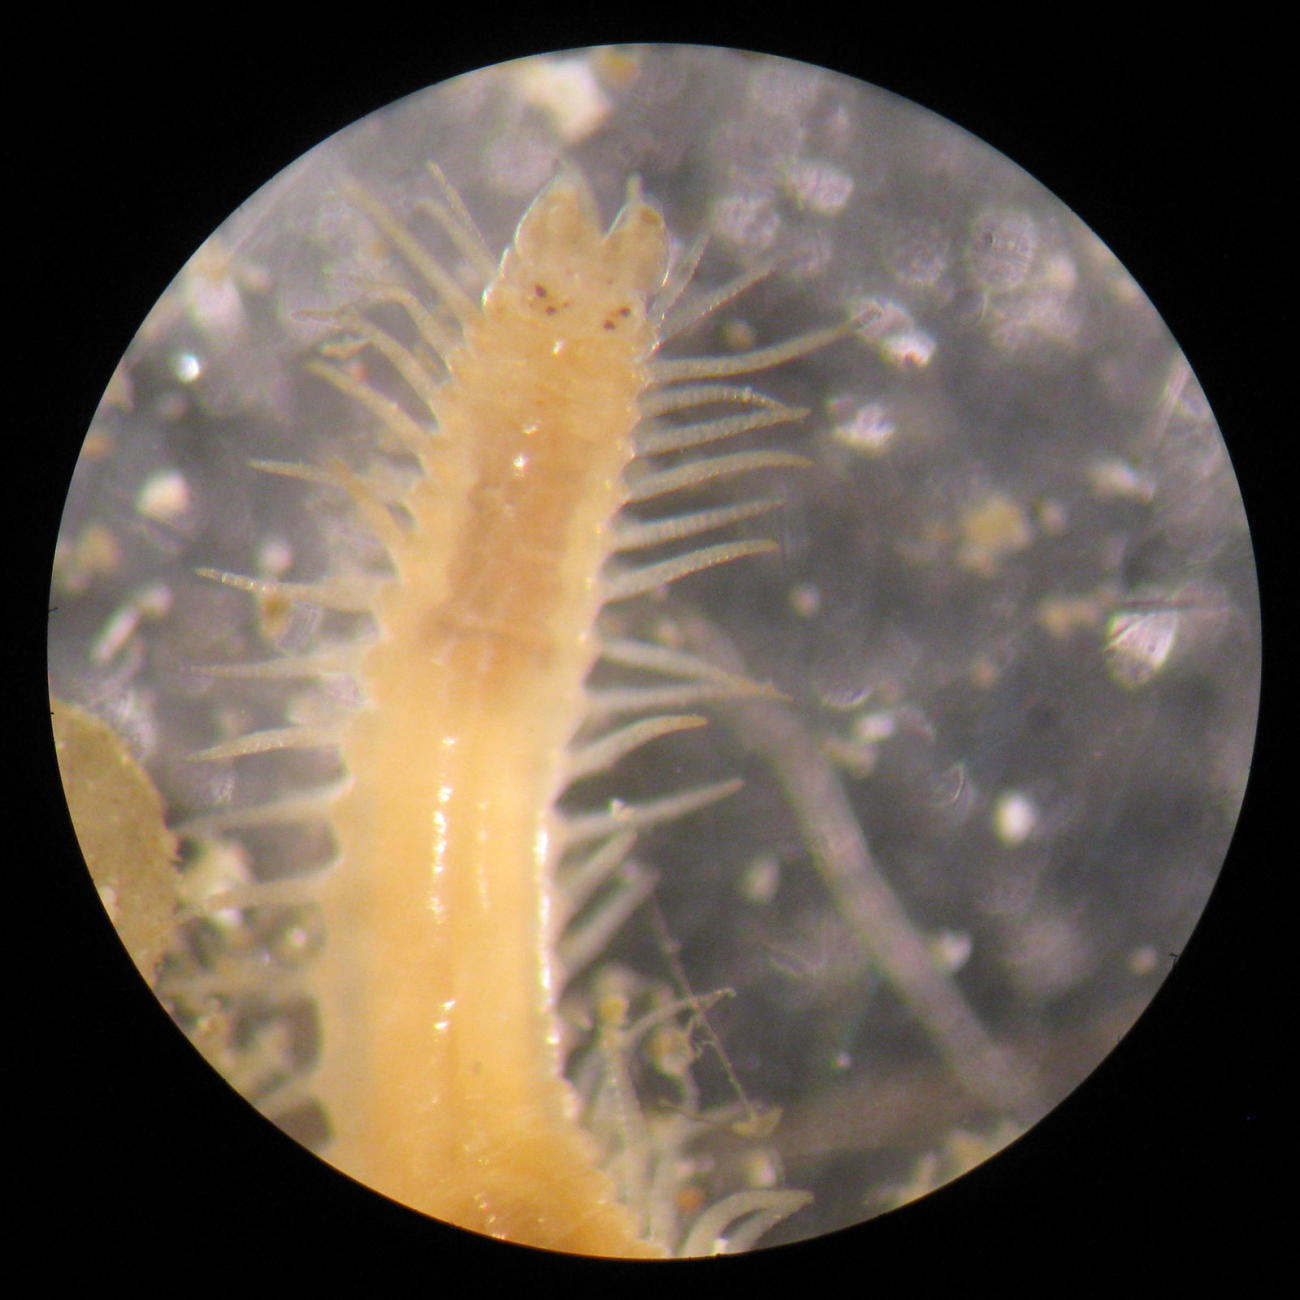 A syllid polychaete worm found within a dead Desmophyllum coral skeleton foundalong the wall of Norfolk Canyon